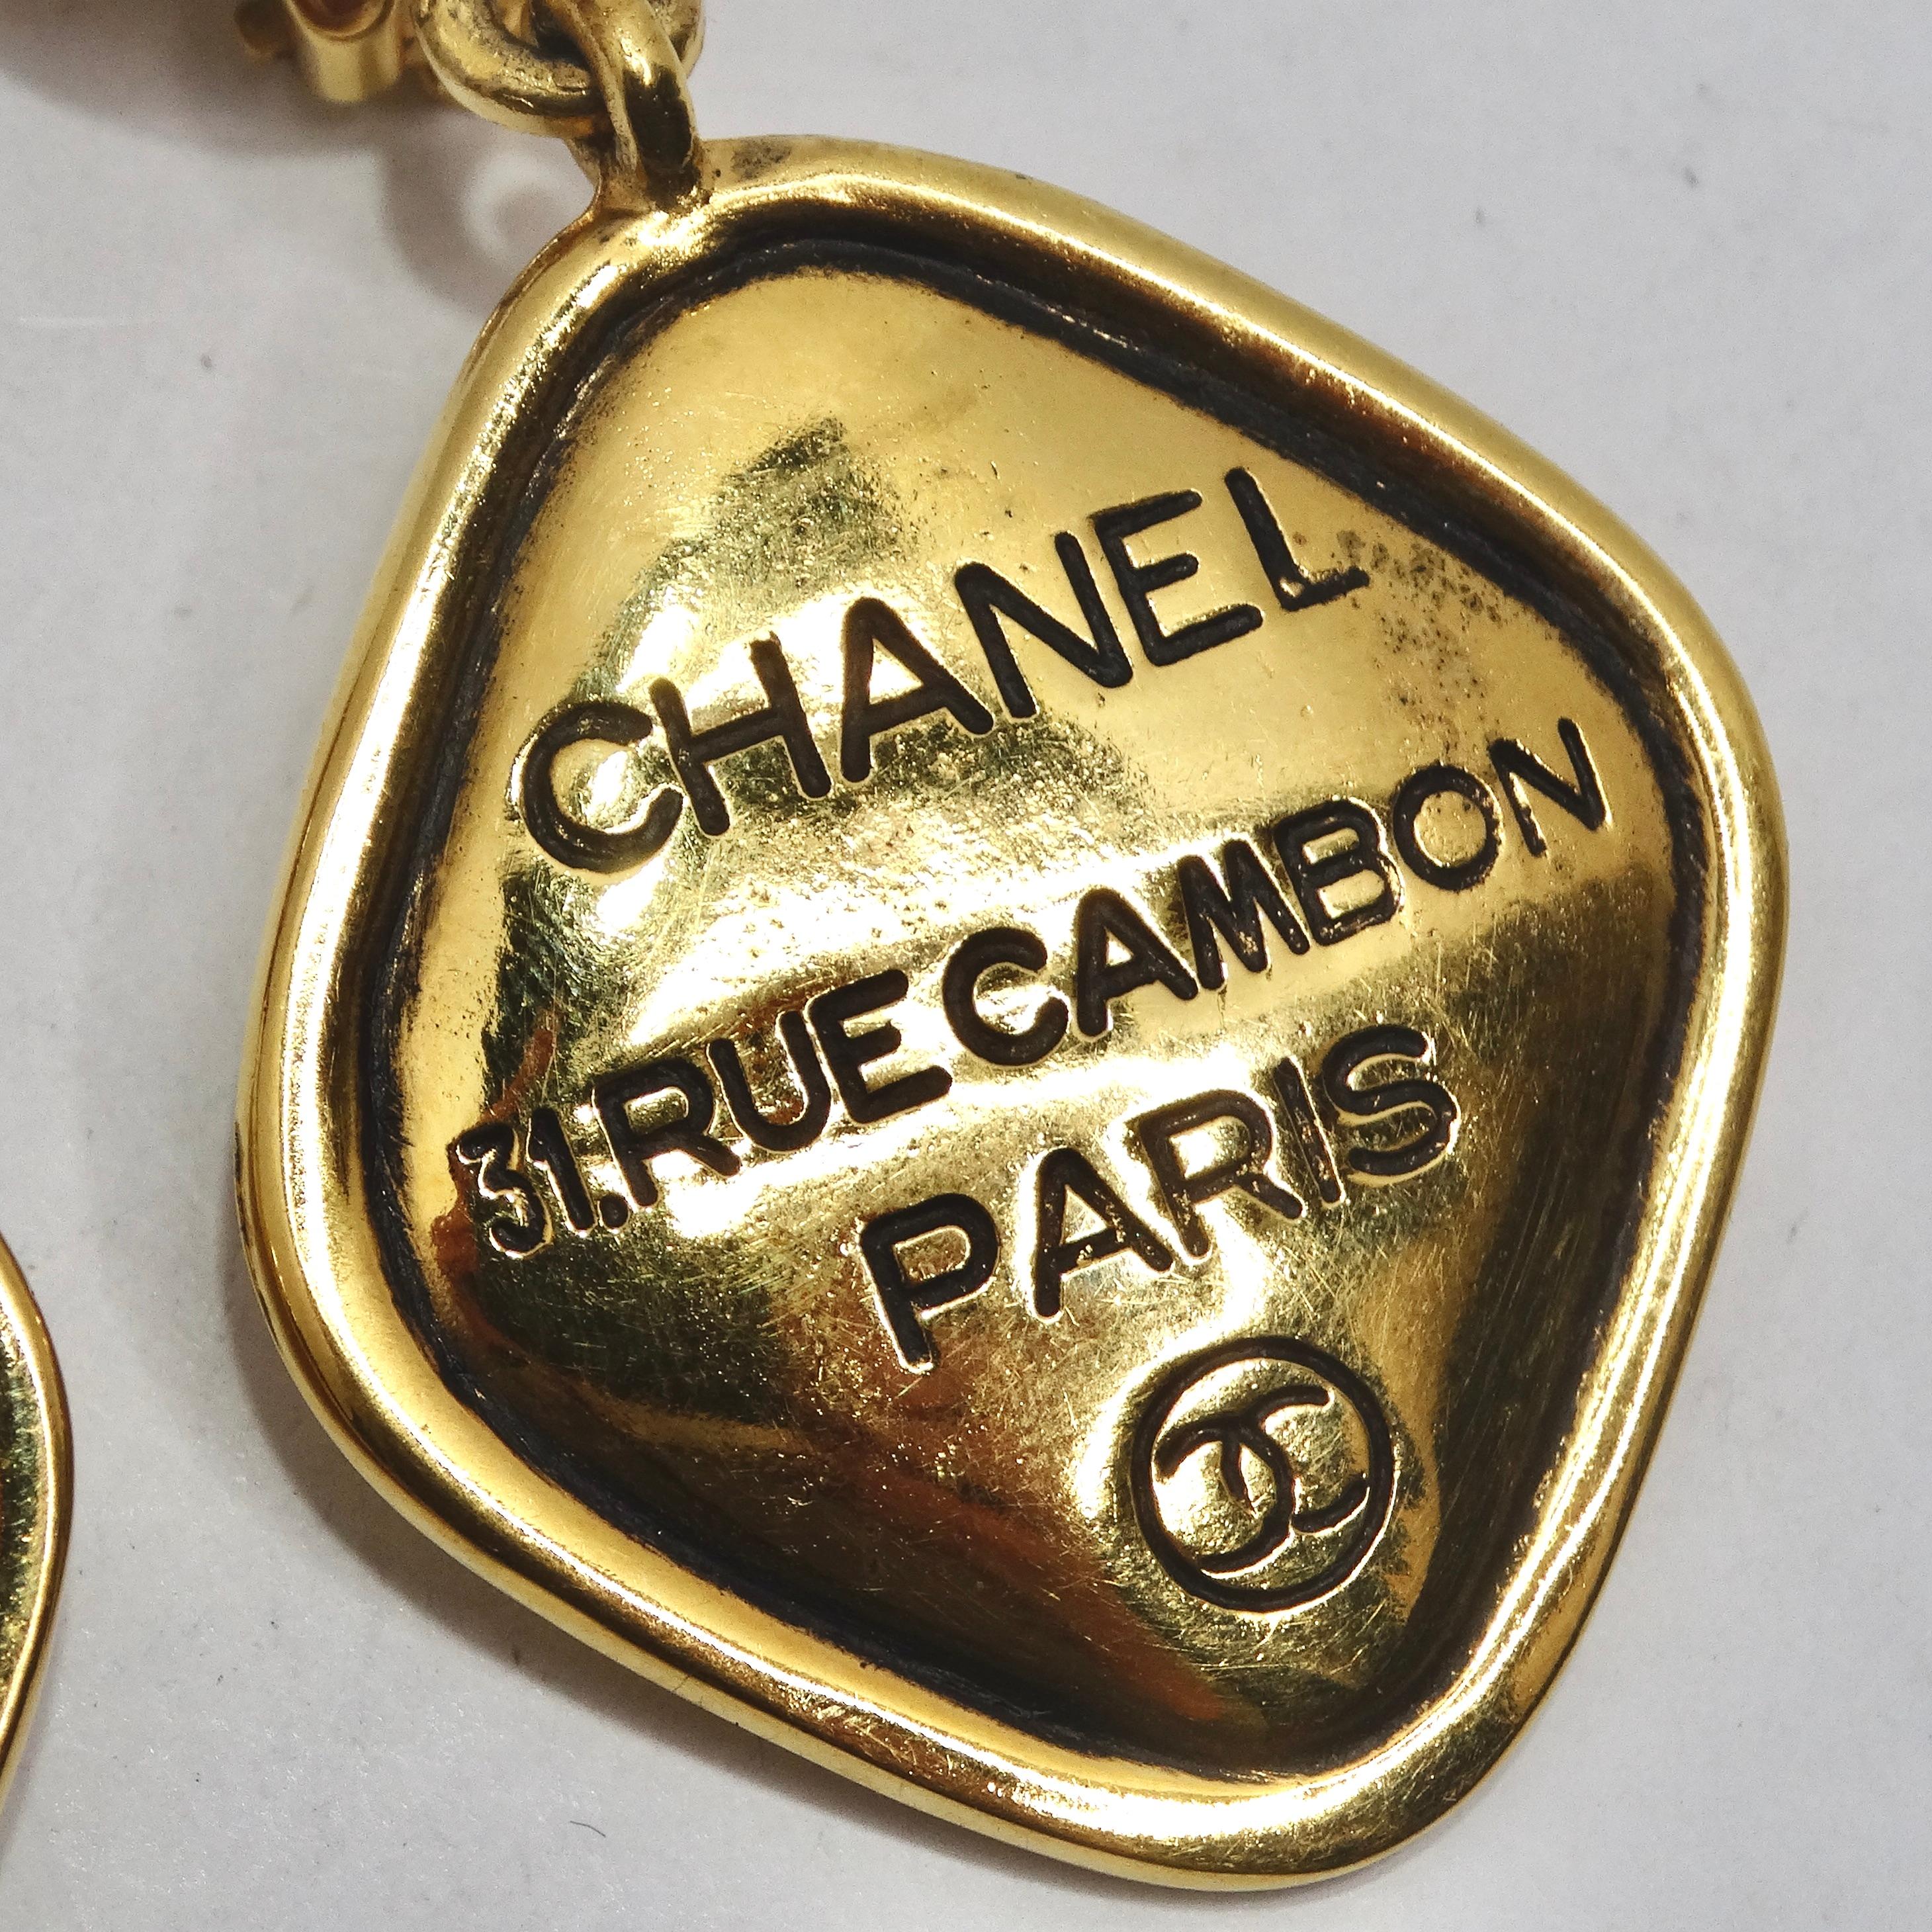 Introducing a stunning pair of classic Chanel earrings from the 1980s, the Chanel 31 Rue Cambon CC Gold Tone Clip On Drop Earrings. Engraved with 